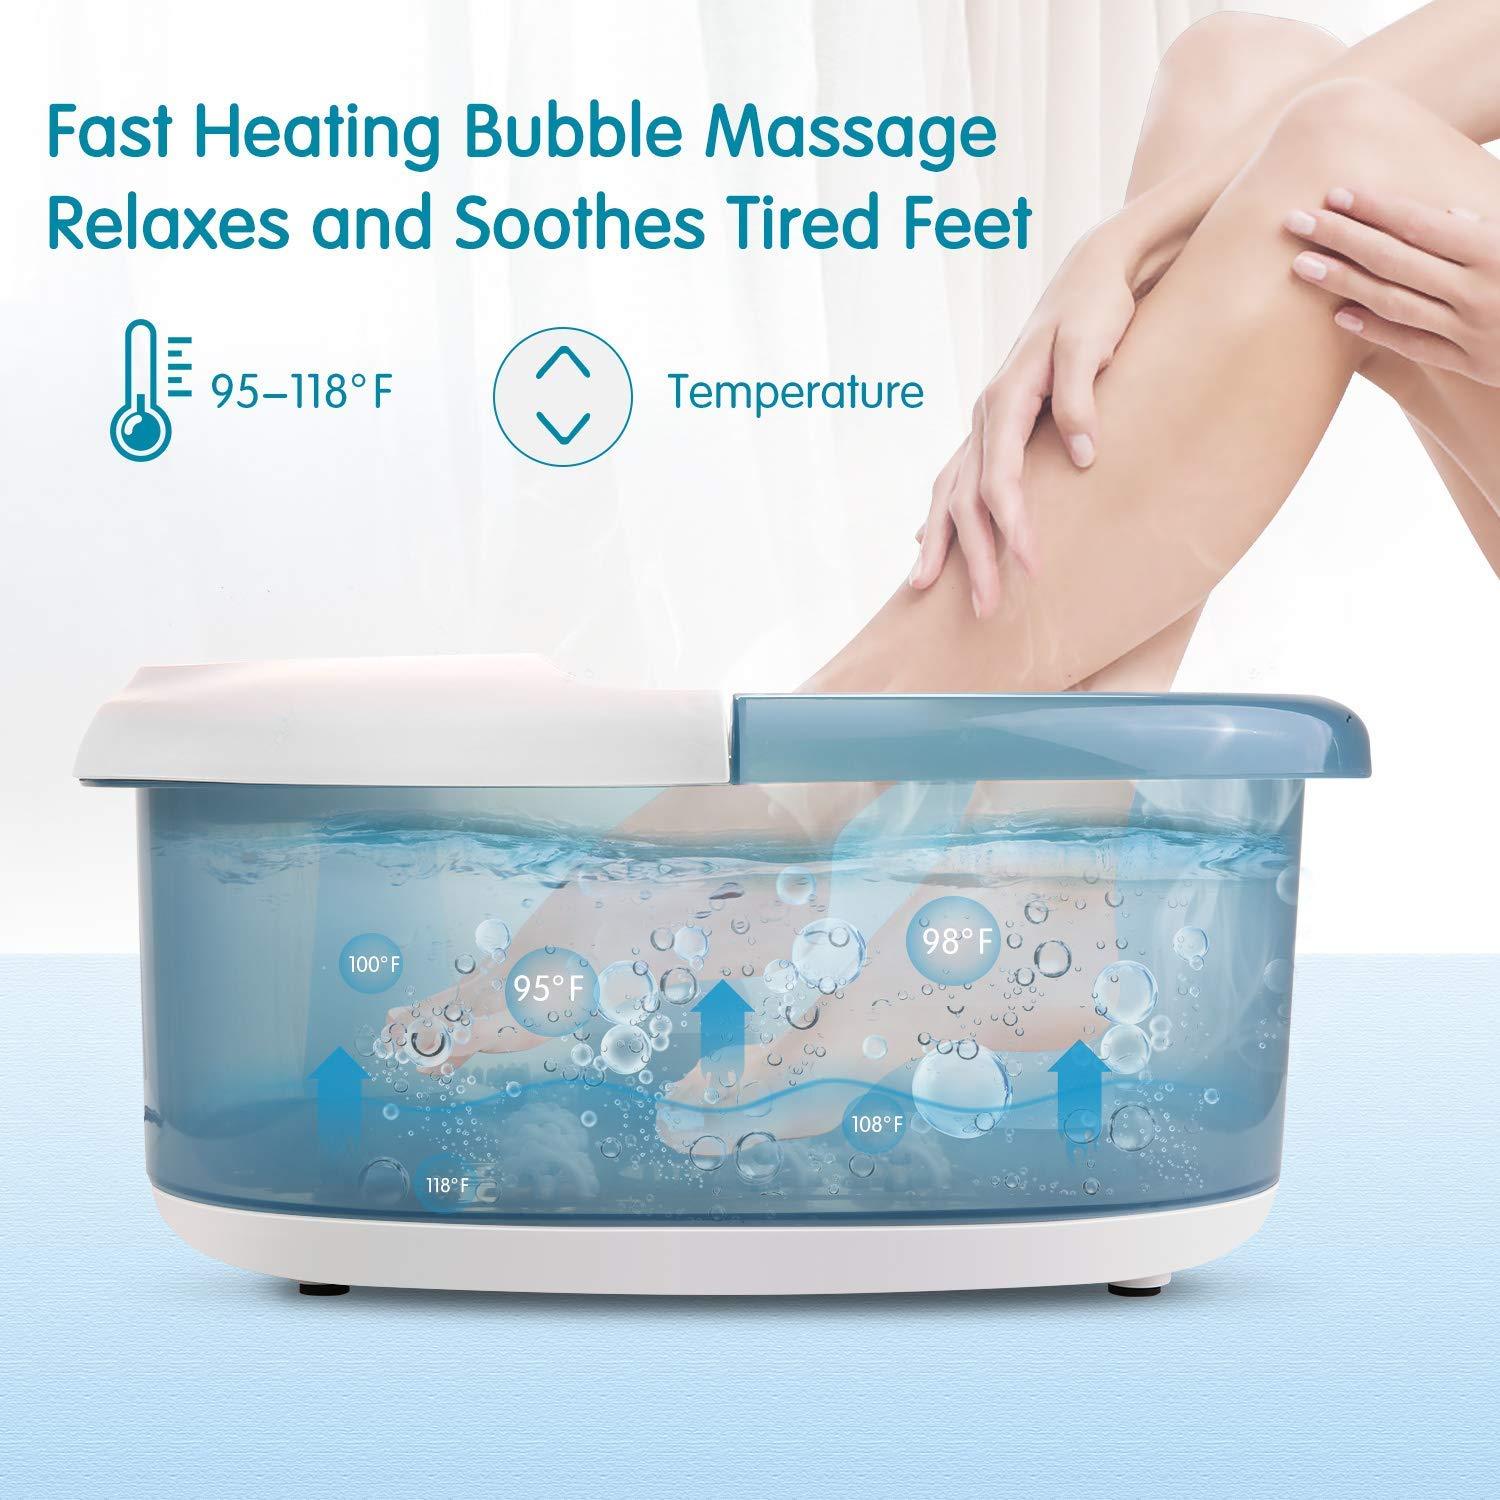 Load image into Gallery viewer, Foot Spa Bath Massager with Heat Bubbles Vibration, 14 Shiatsu Massaging Rollers to Relax Tired Feet, Adjustable Temperature Pedicure Tub for Home Office Use - NAIPO
